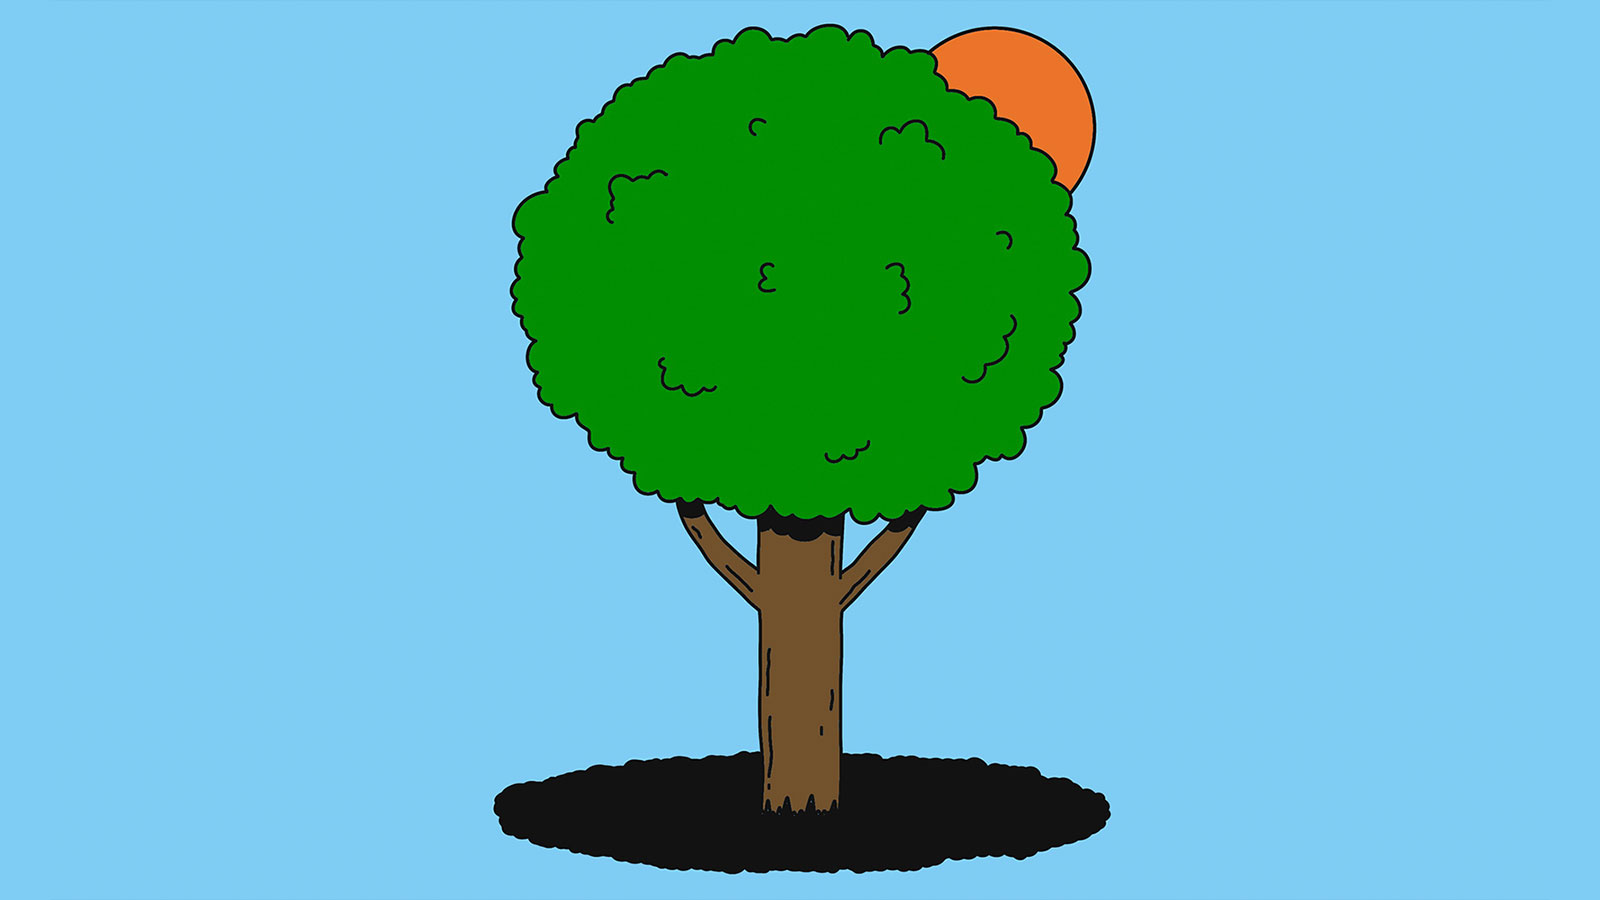 Illustration of a tree blocking out the sun